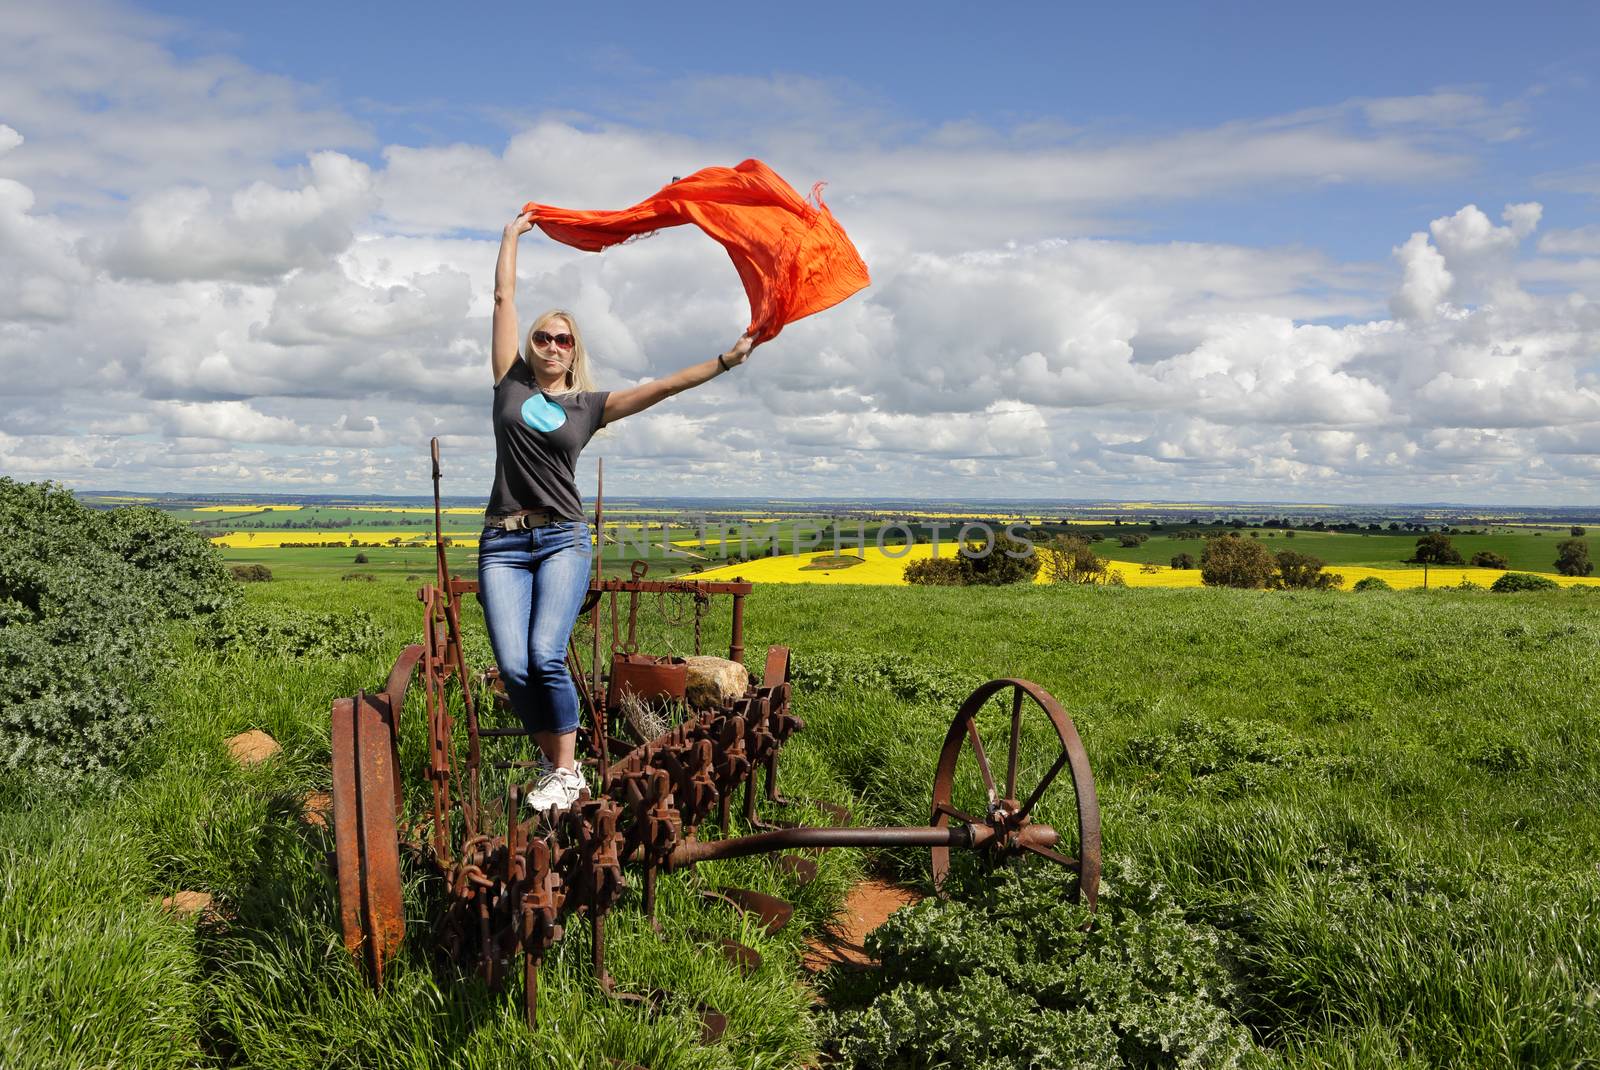 A woman on an old rusted tractor plough enjoying country life.  Wellness, fun